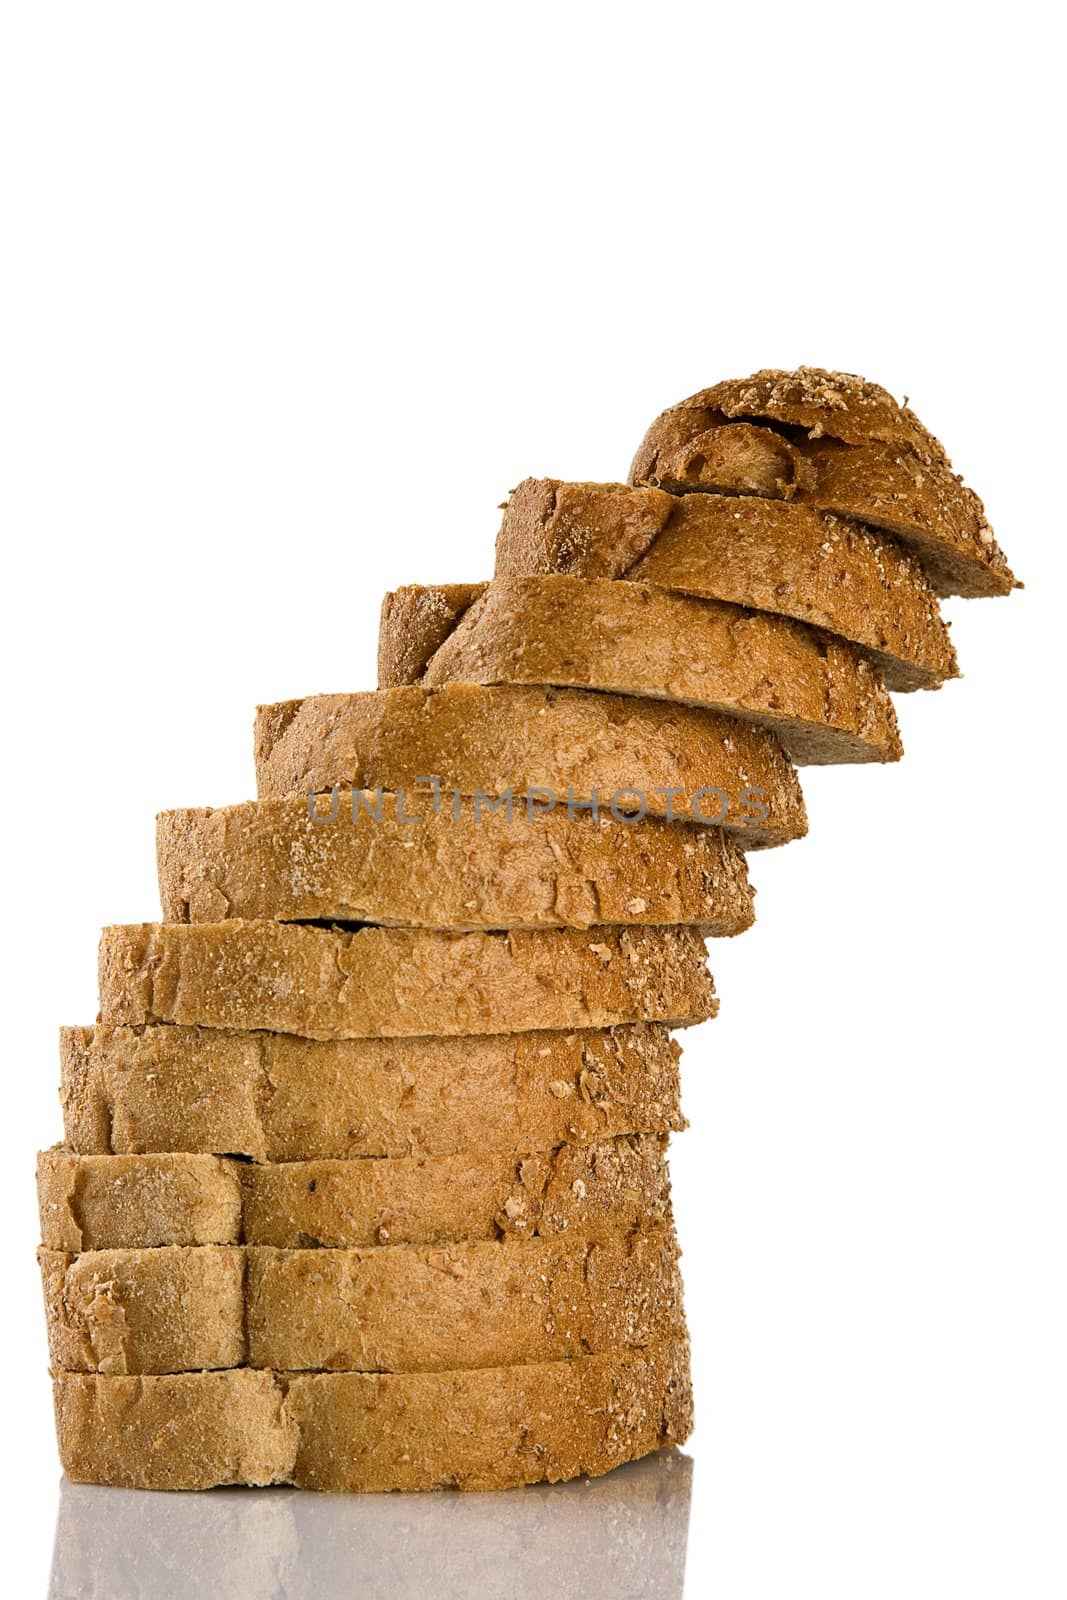 tower of sliced brown bread, isolated on white background